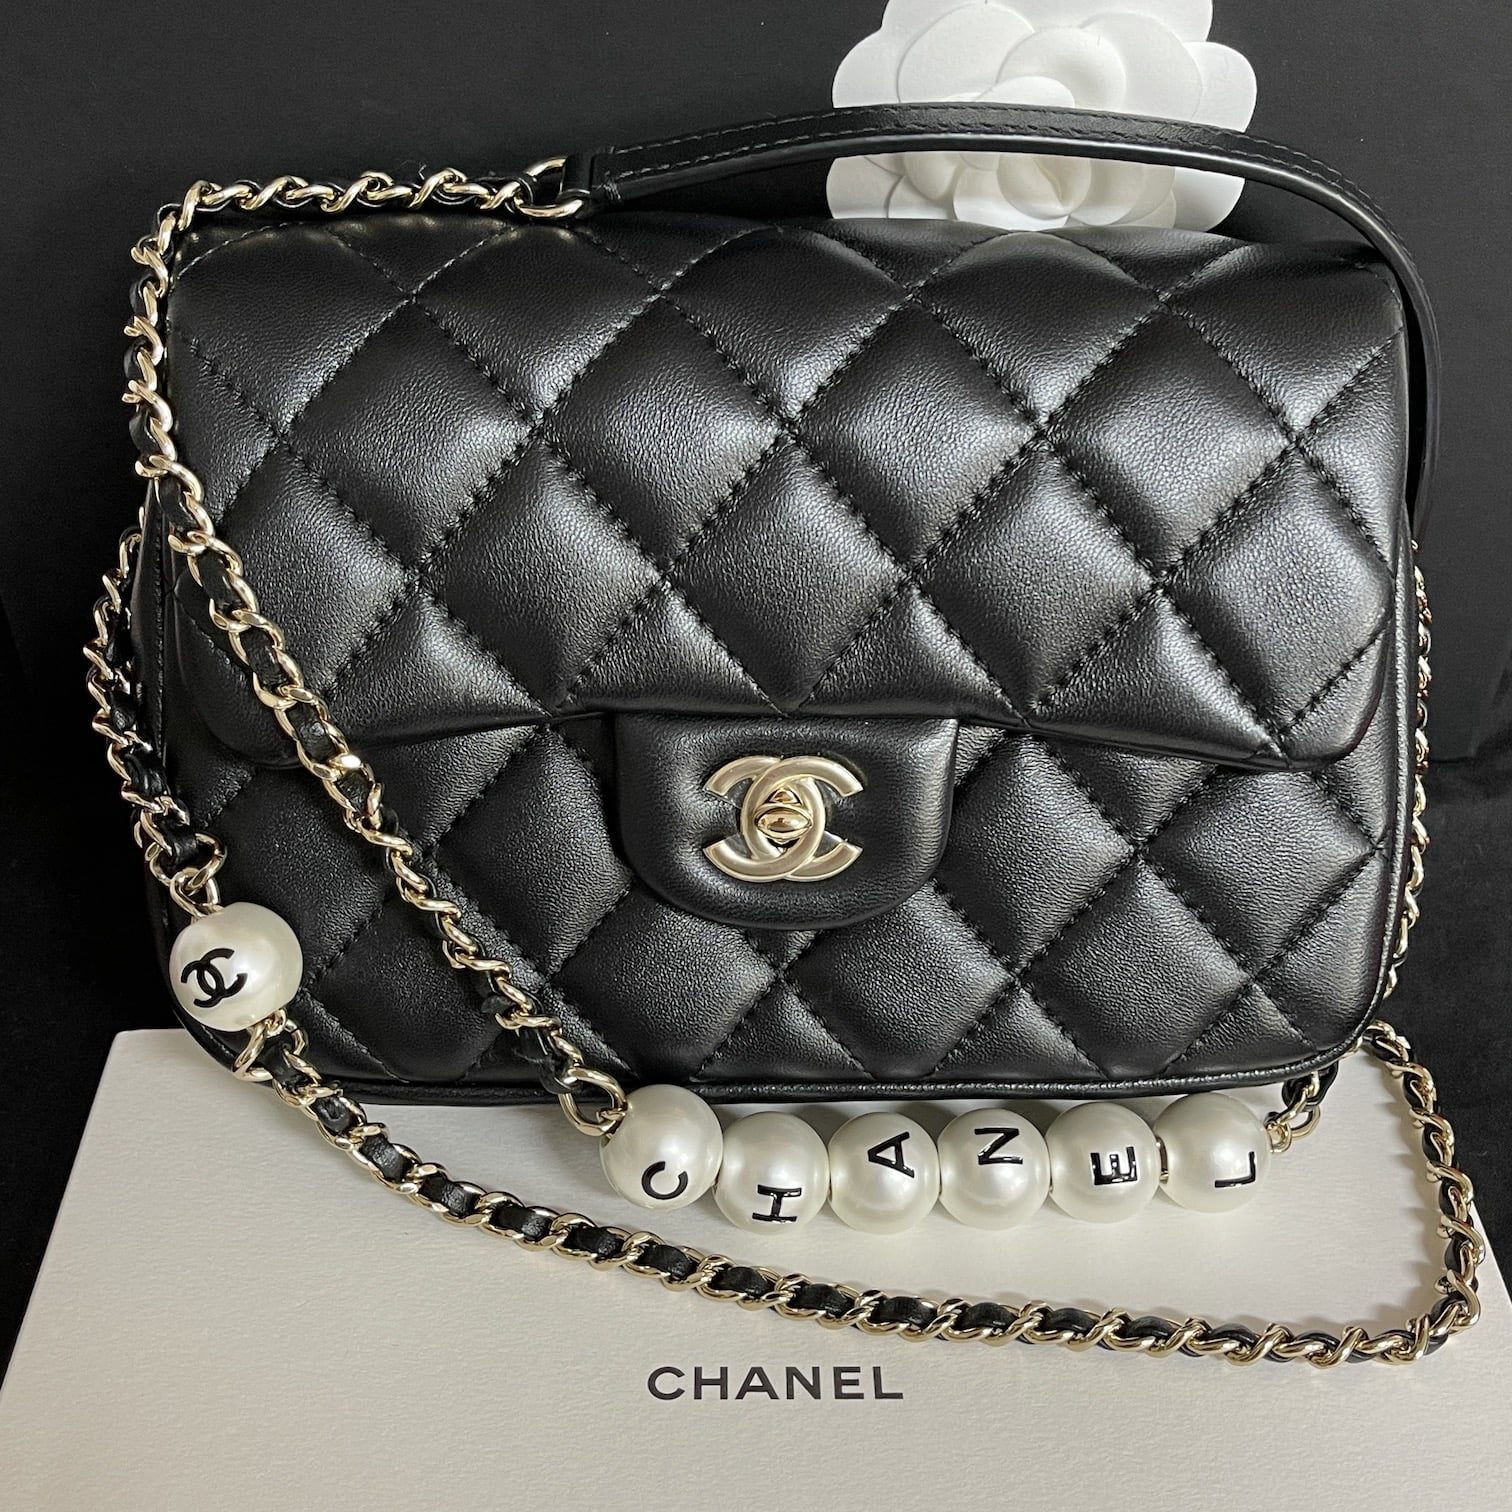 FIVE reasons you SHOULDN'T buy the Chanel classic flap bag! - Fashion For  Lunch.